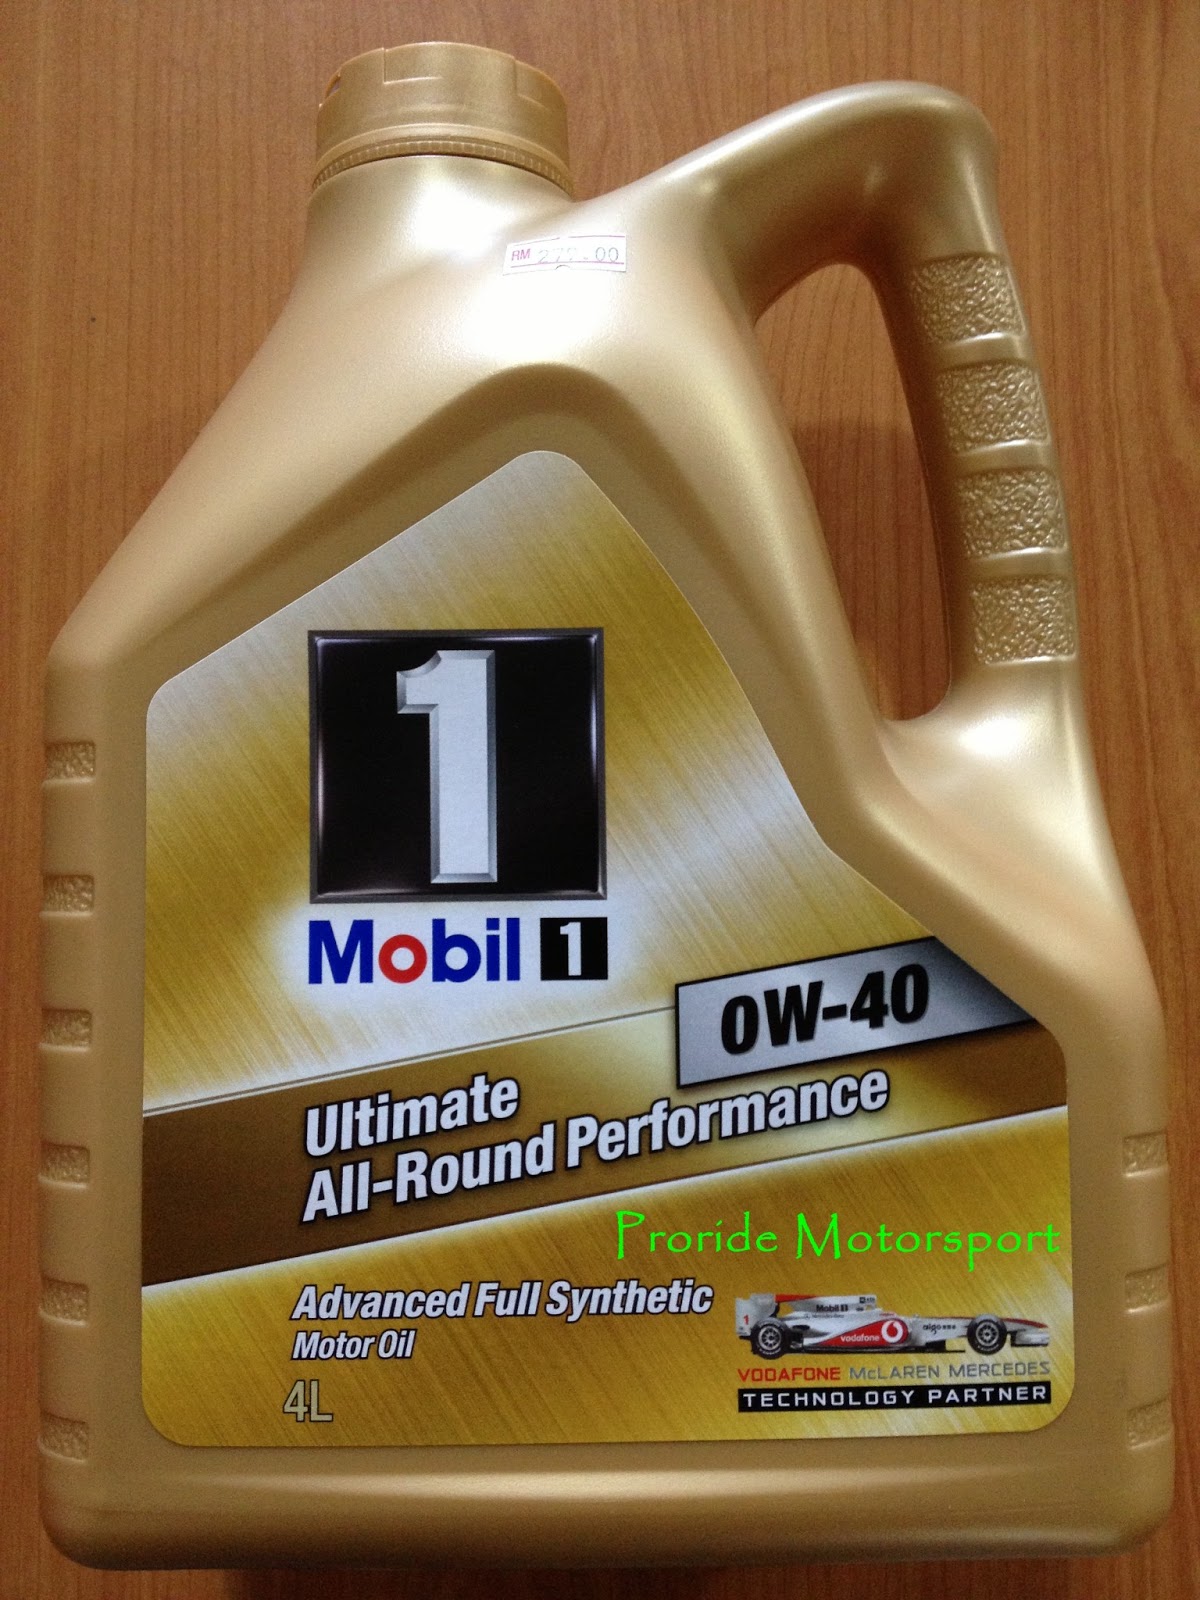 Pro-ride Motorsports:  1 0W-40 Ultimate Advanced Full Synthetic .